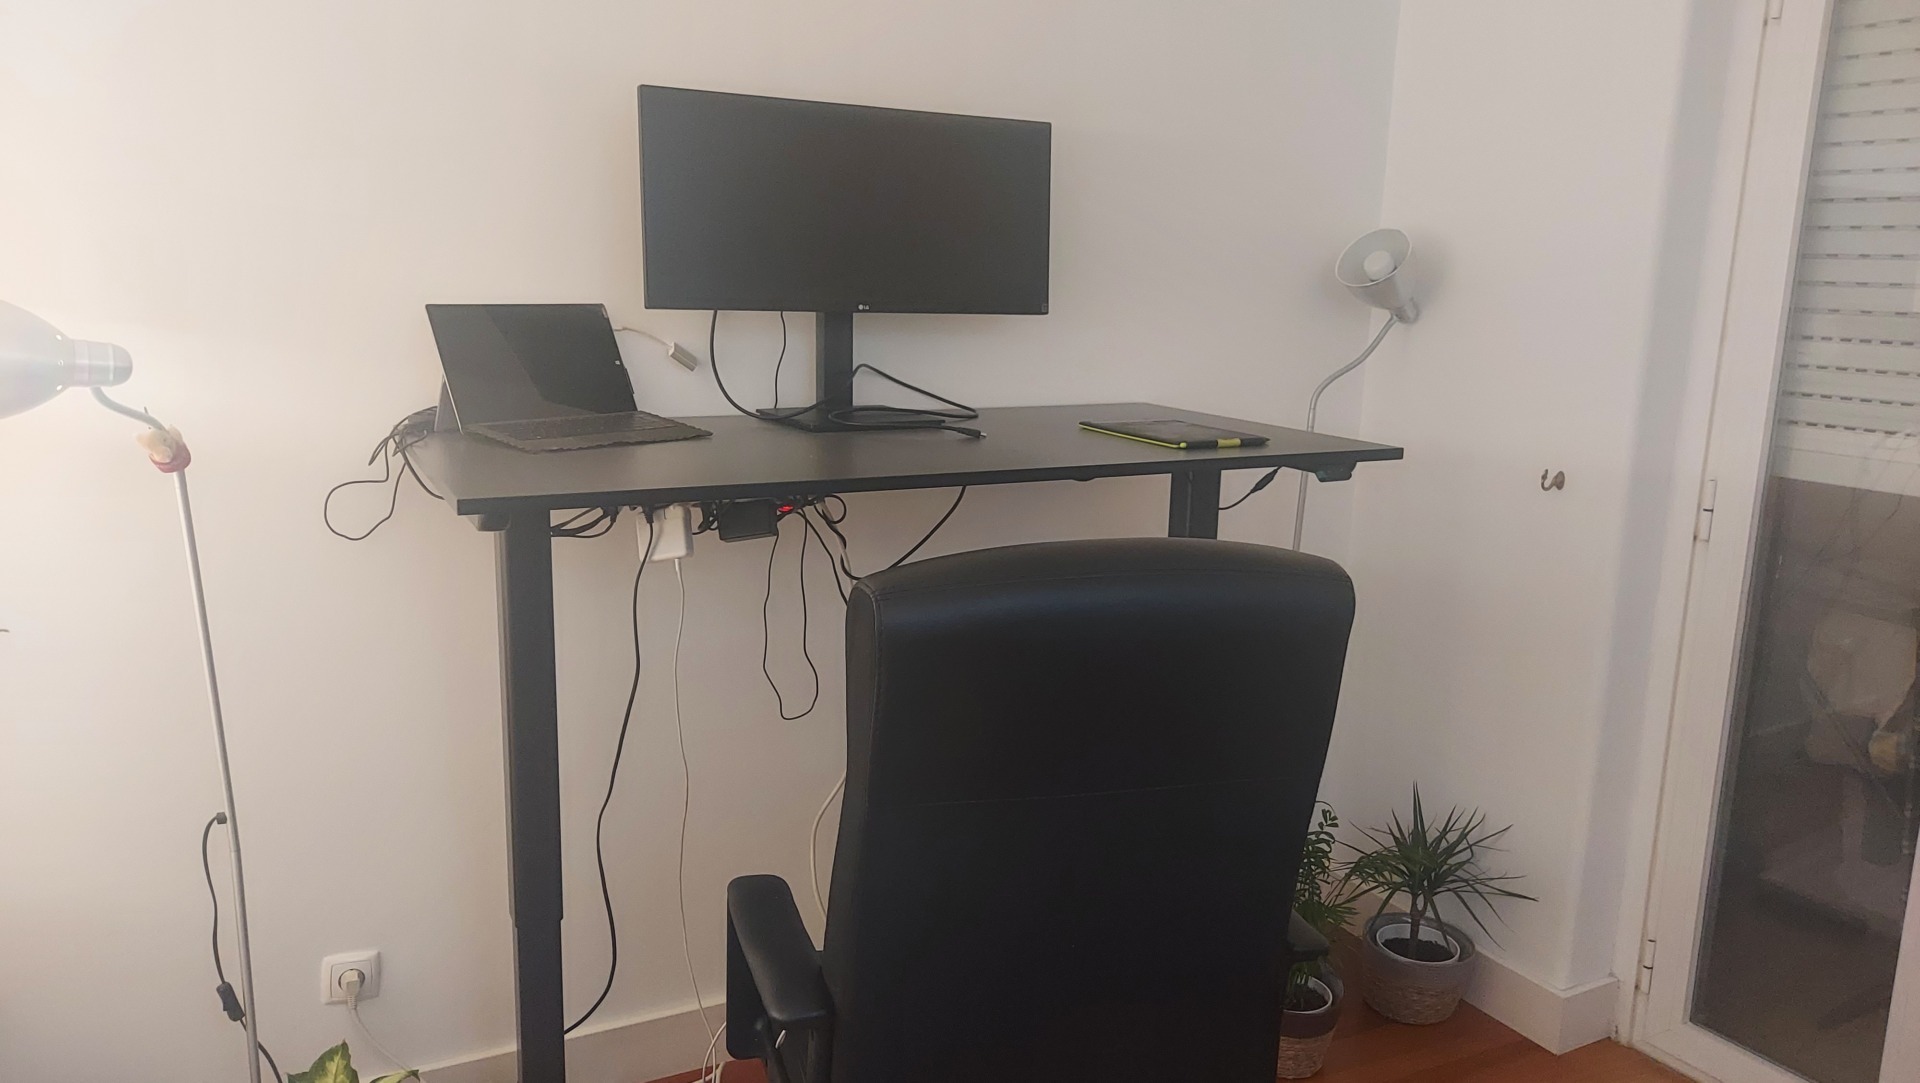 The standing desk I got from Yassa and the wisdescreen LG